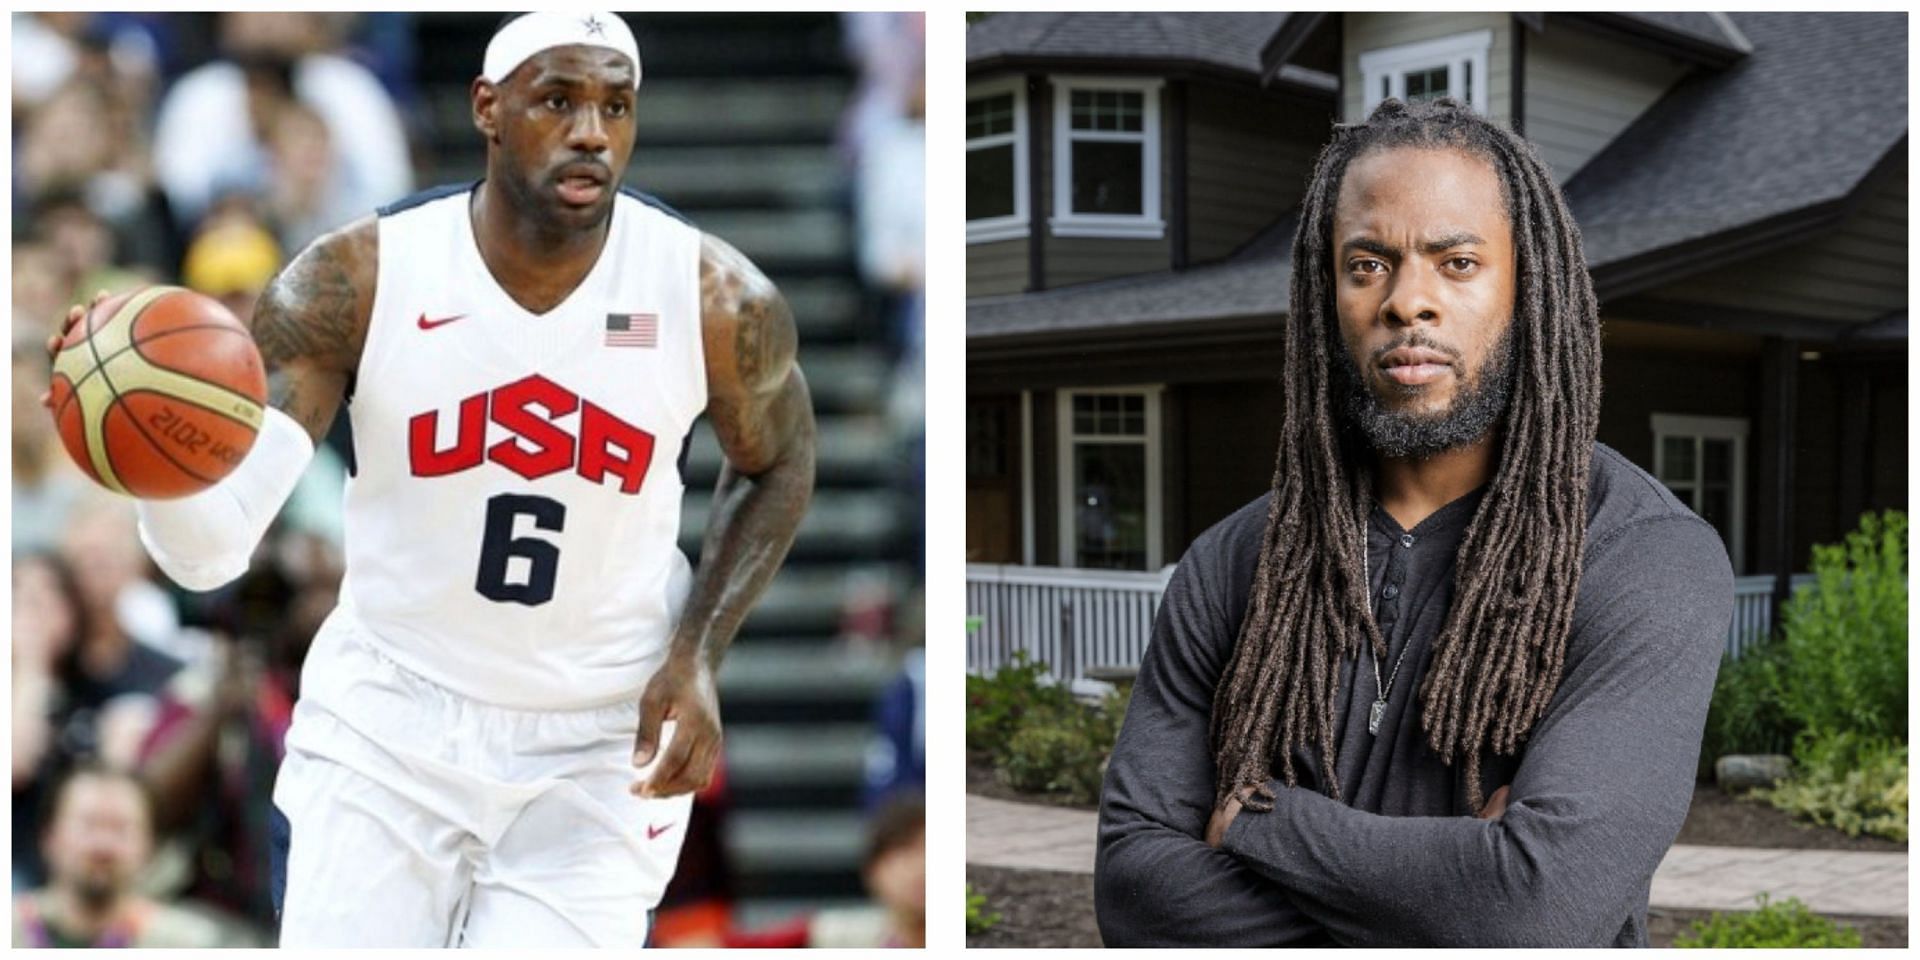 Richard Sherman (R) expects Team USA to win Olympics led by LeBron James (R)